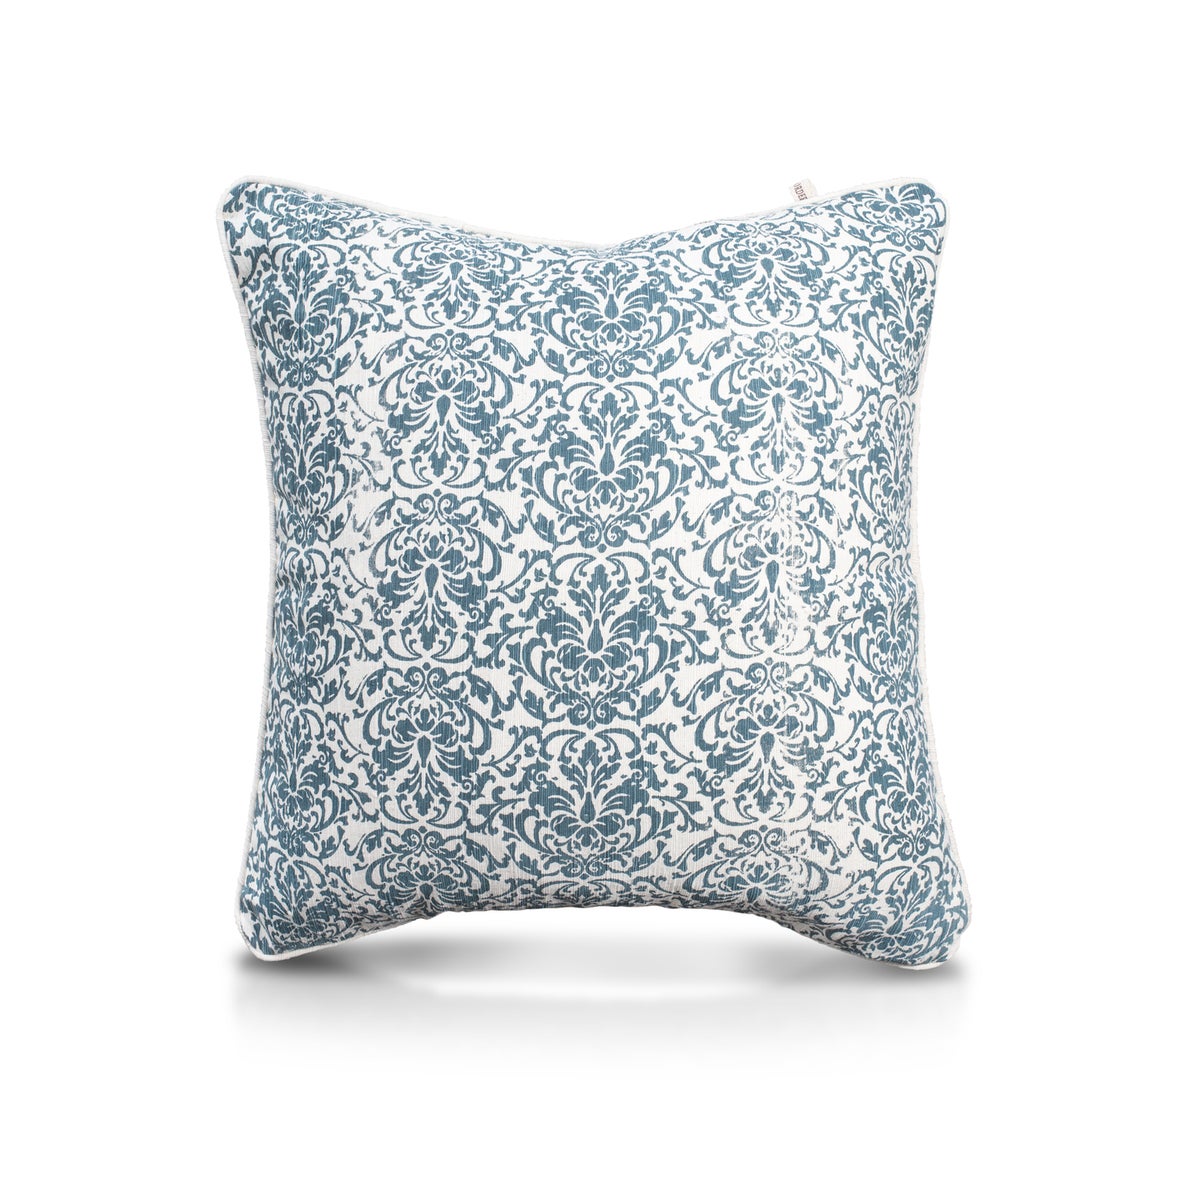 Pillow, 24" with Piping - Damask, TUR